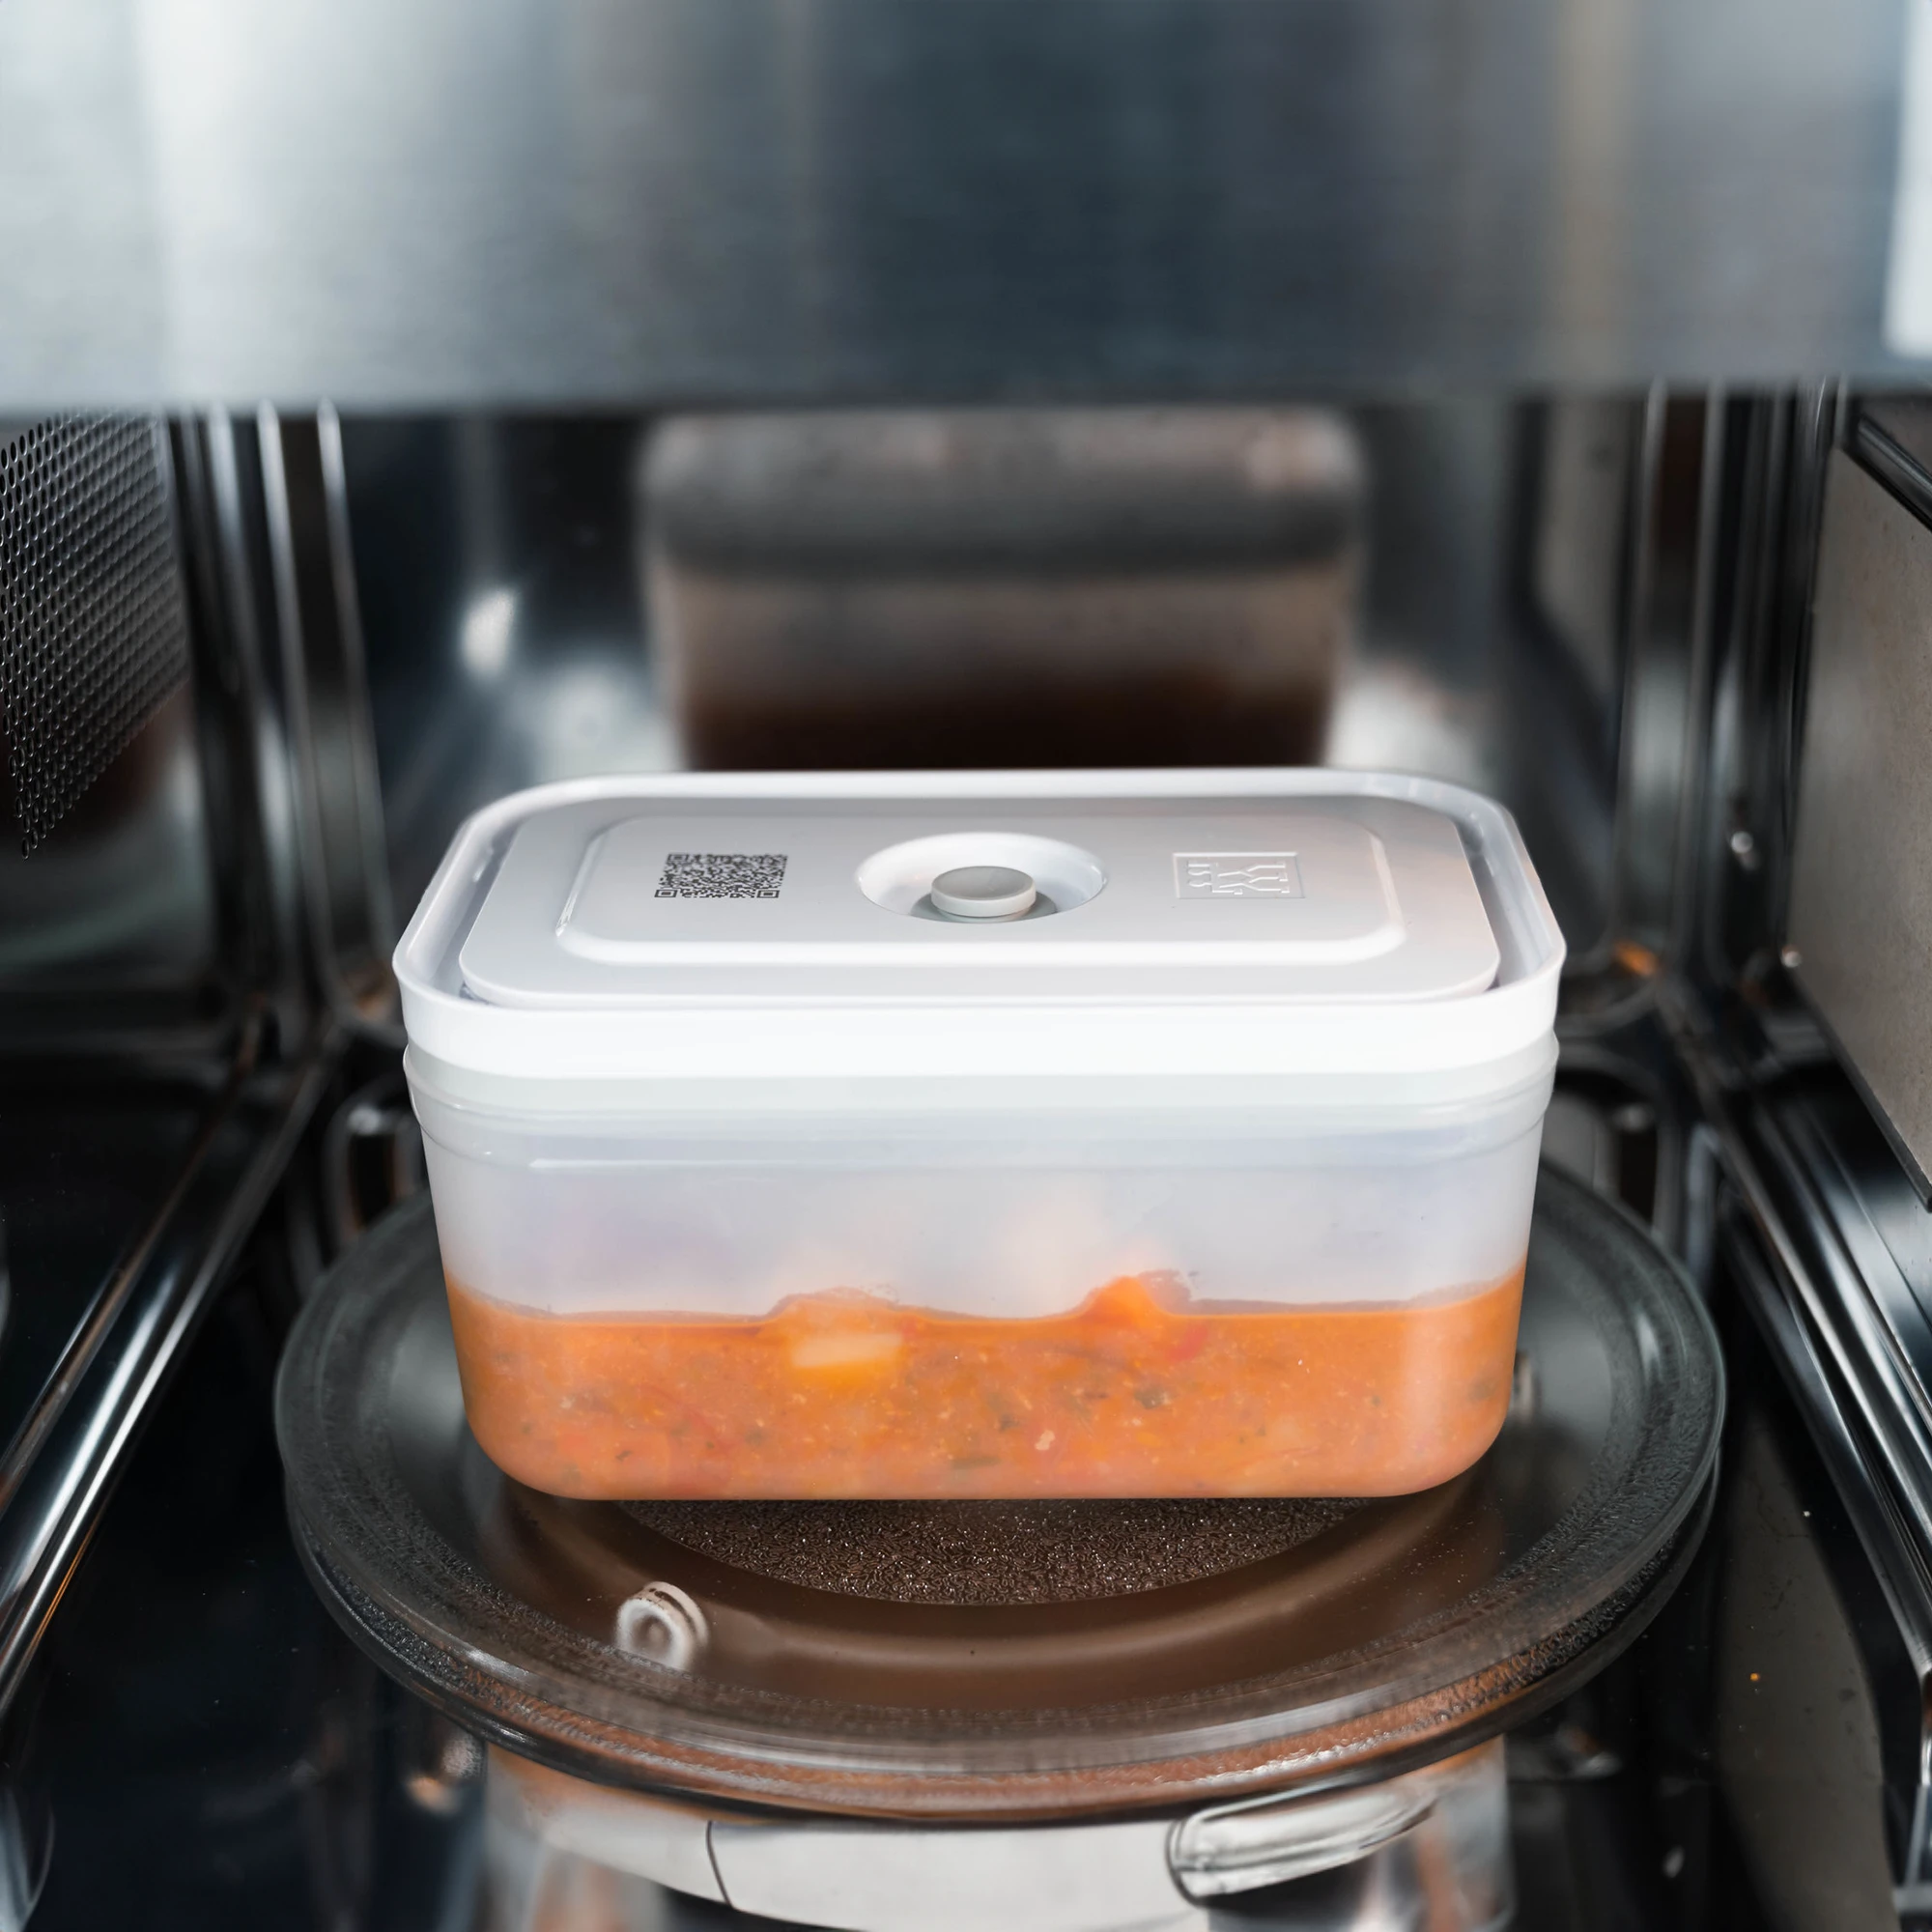 https://www.homethreads.com/files/zwilling/1002499-zwilling-fresh-save-plastic-airtight-food-storage-container-meal-prep-container-small-7.webp